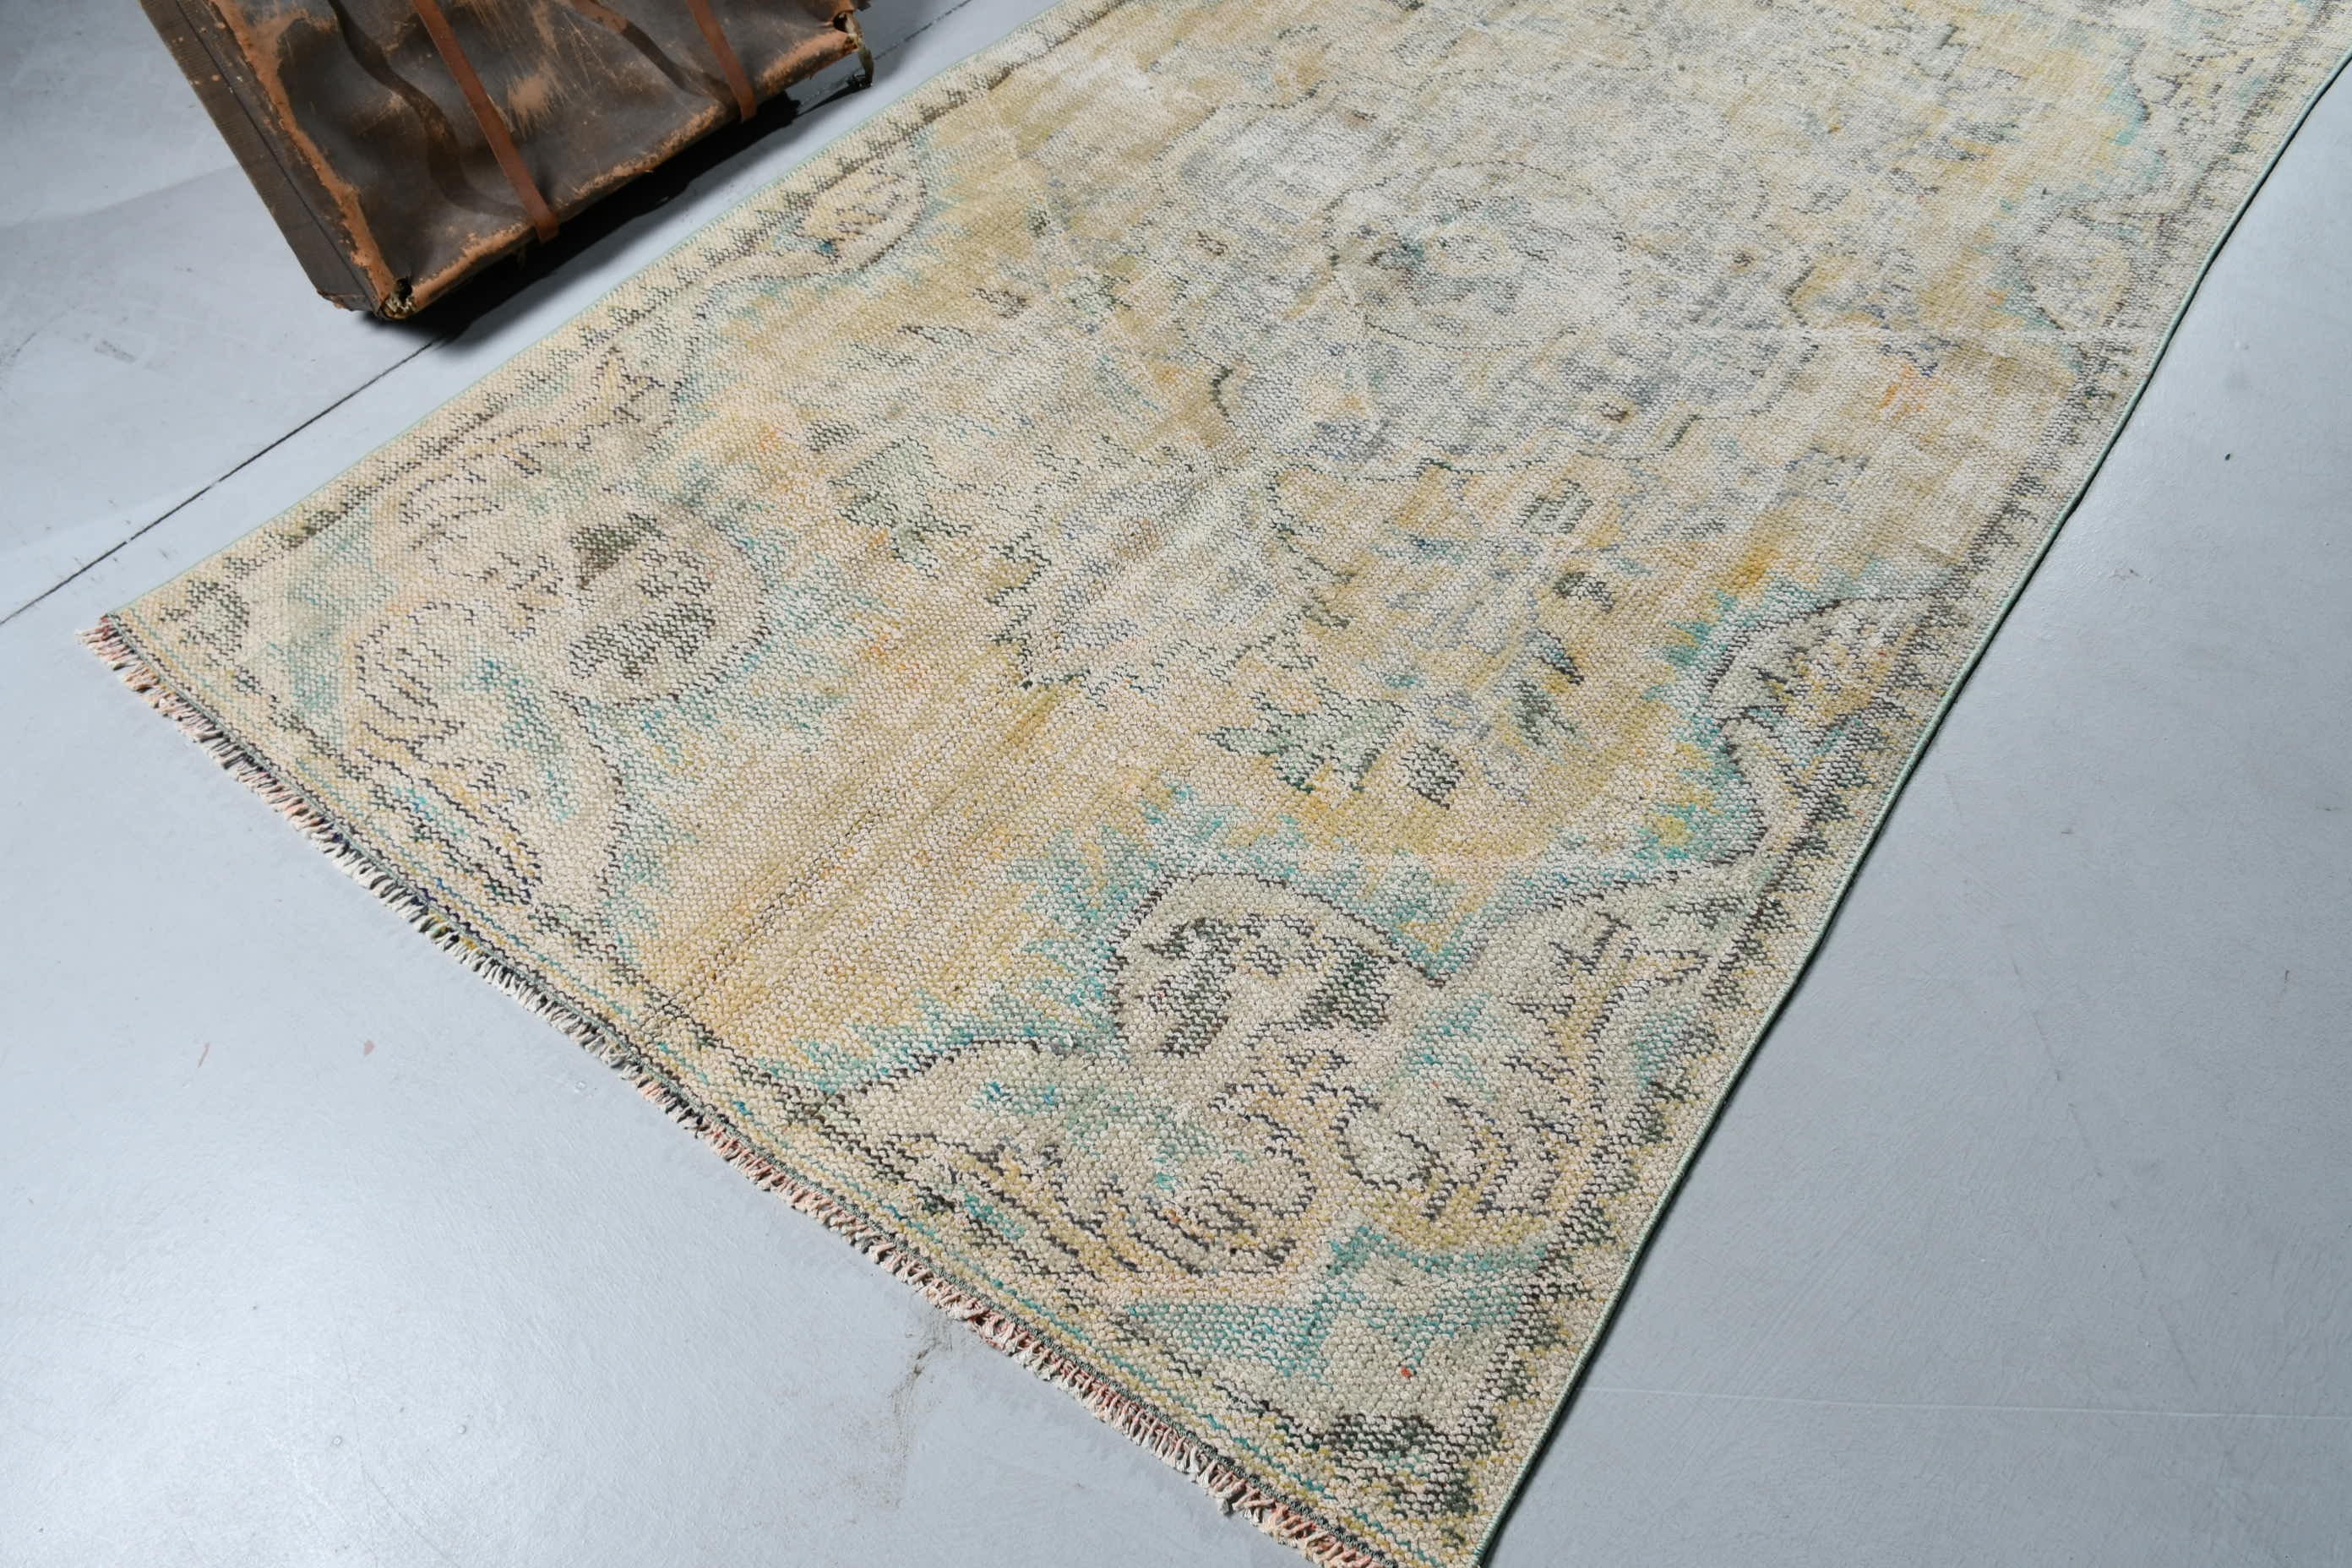 Bedroom Rug, Antique Rug, Dining Room Rugs, Turkish Rugs, Anatolian Rugs, 4.4x8.2 ft Area Rugs, Vintage Rugs, Yellow Home Decor Rug